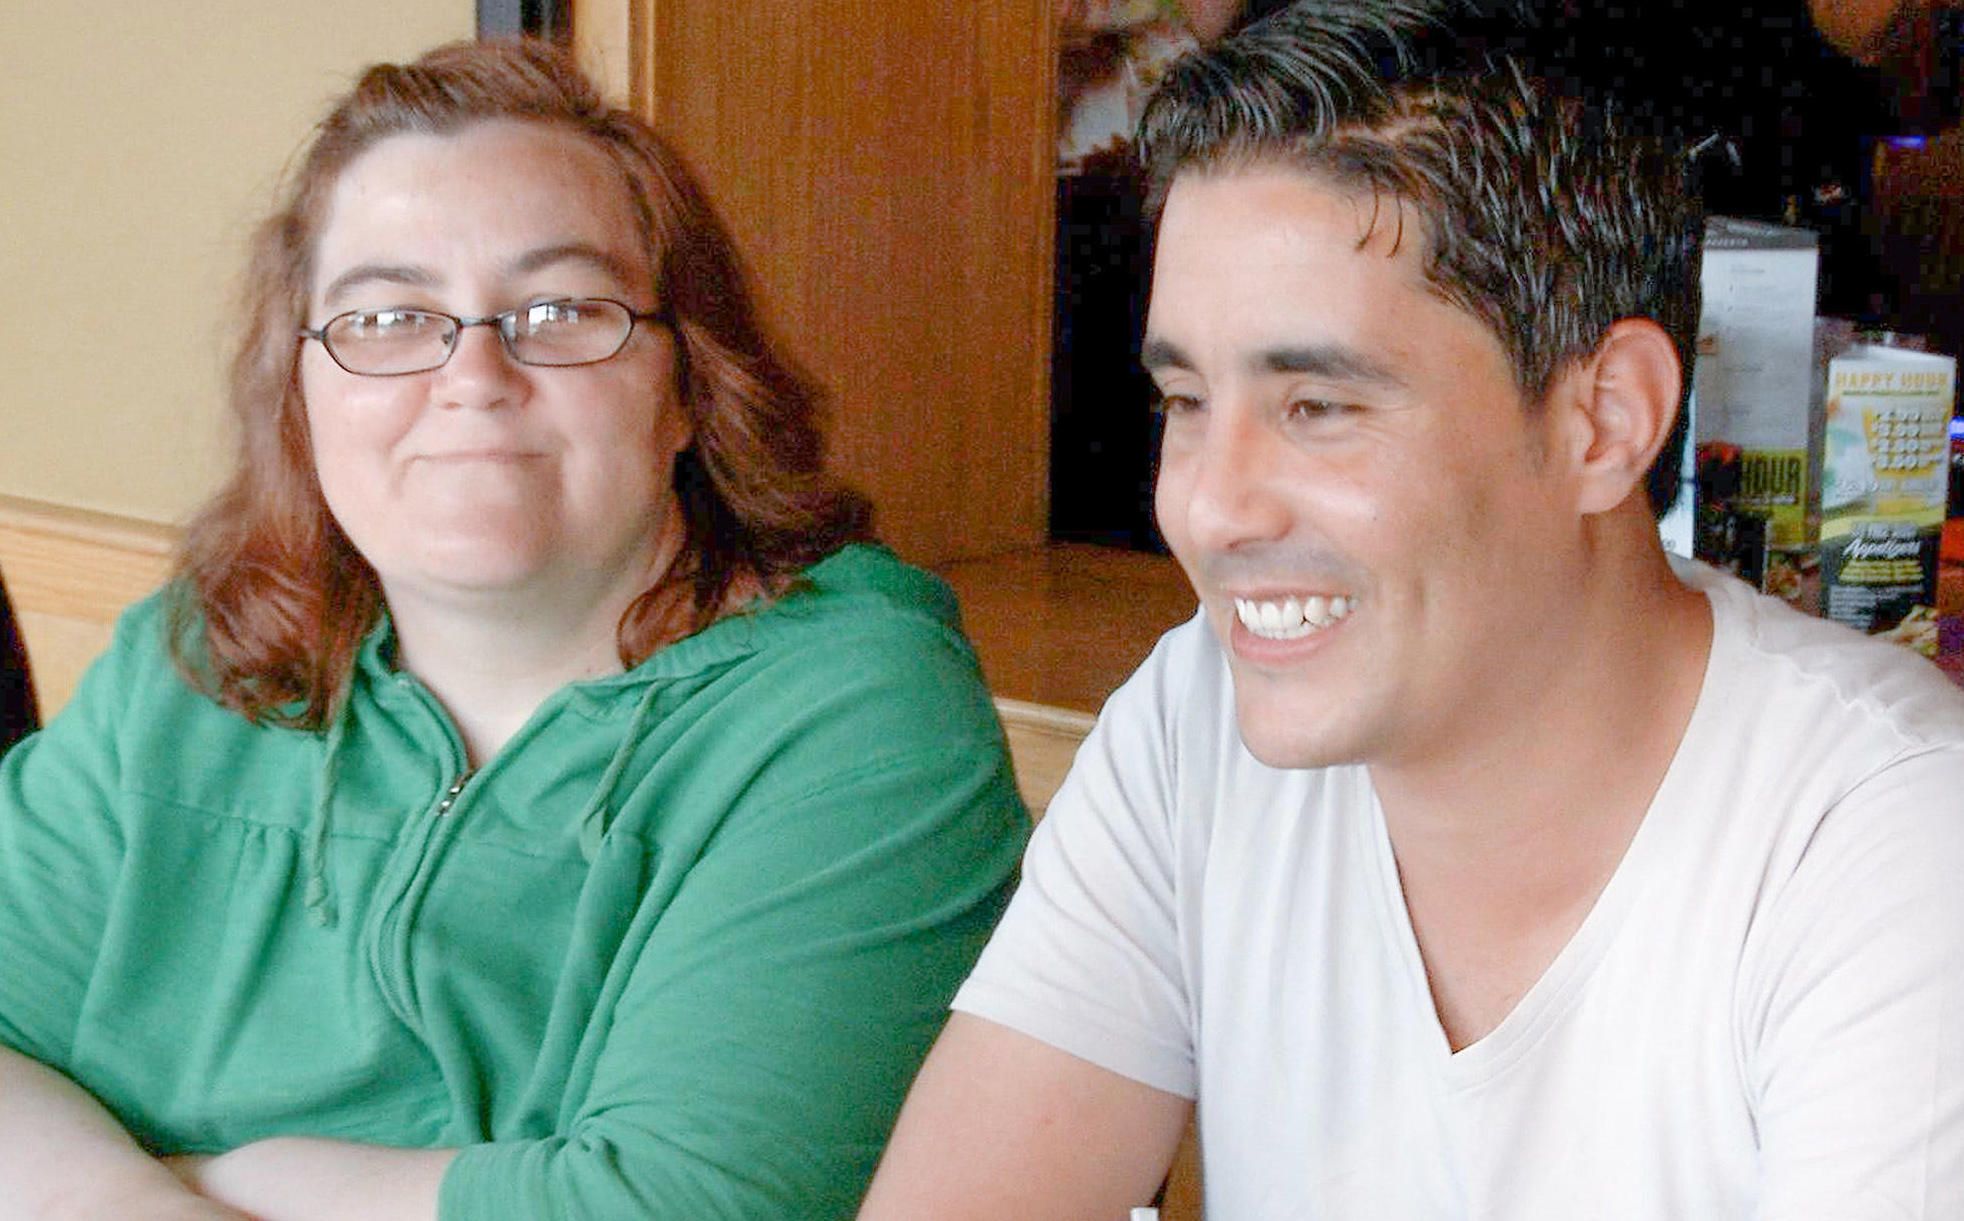 90 Day Fiance Danielle and Mohamed smiling with Danielle in a green top and glasses and Mohamed in a white t-shirt